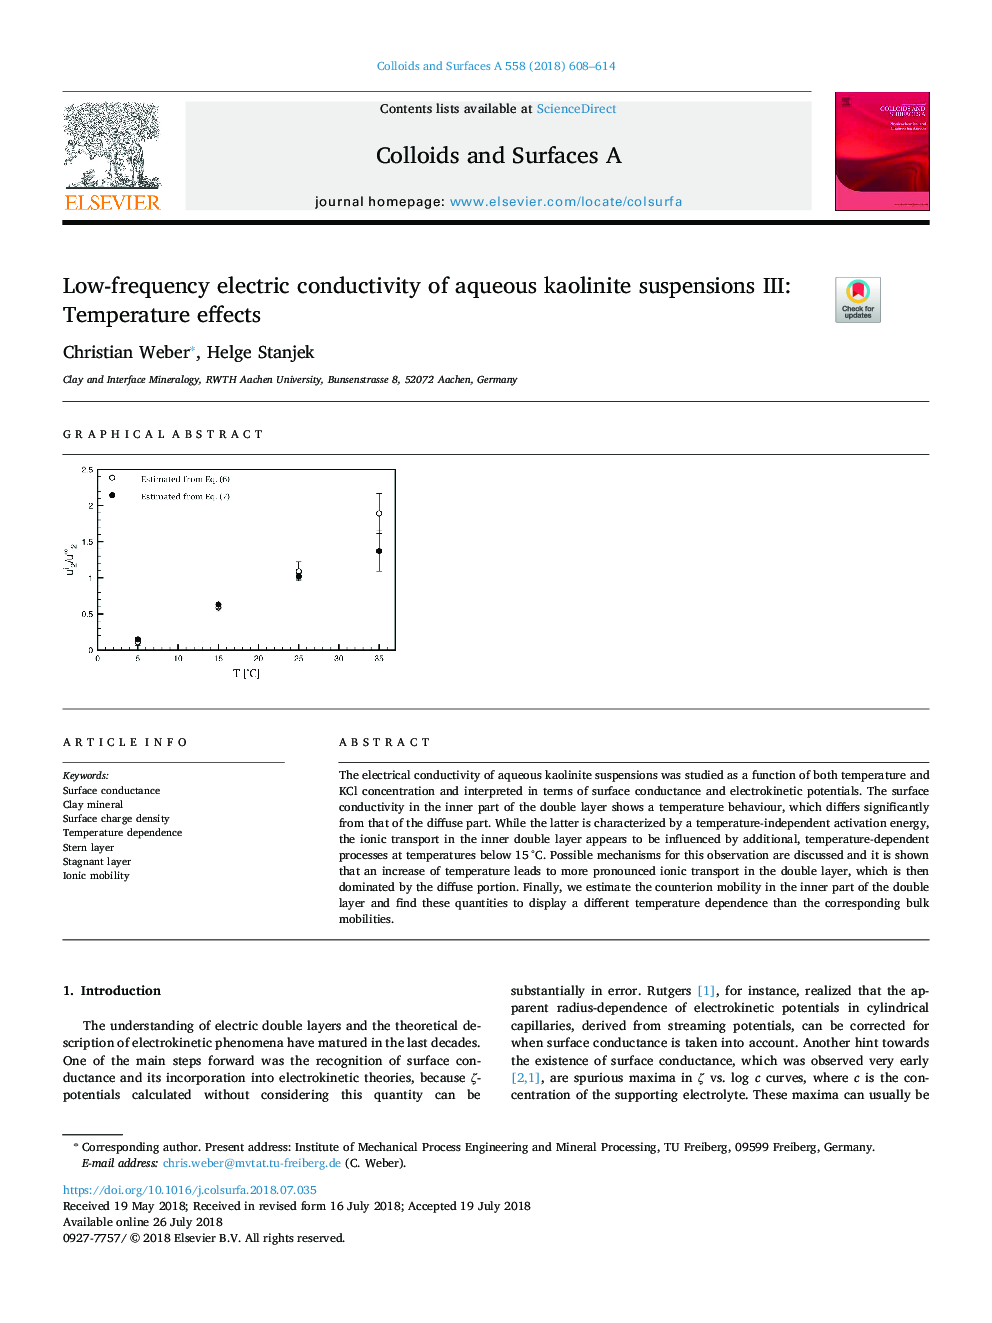 Low-frequency electric conductivity of aqueous kaolinite suspensions III: Temperature effects